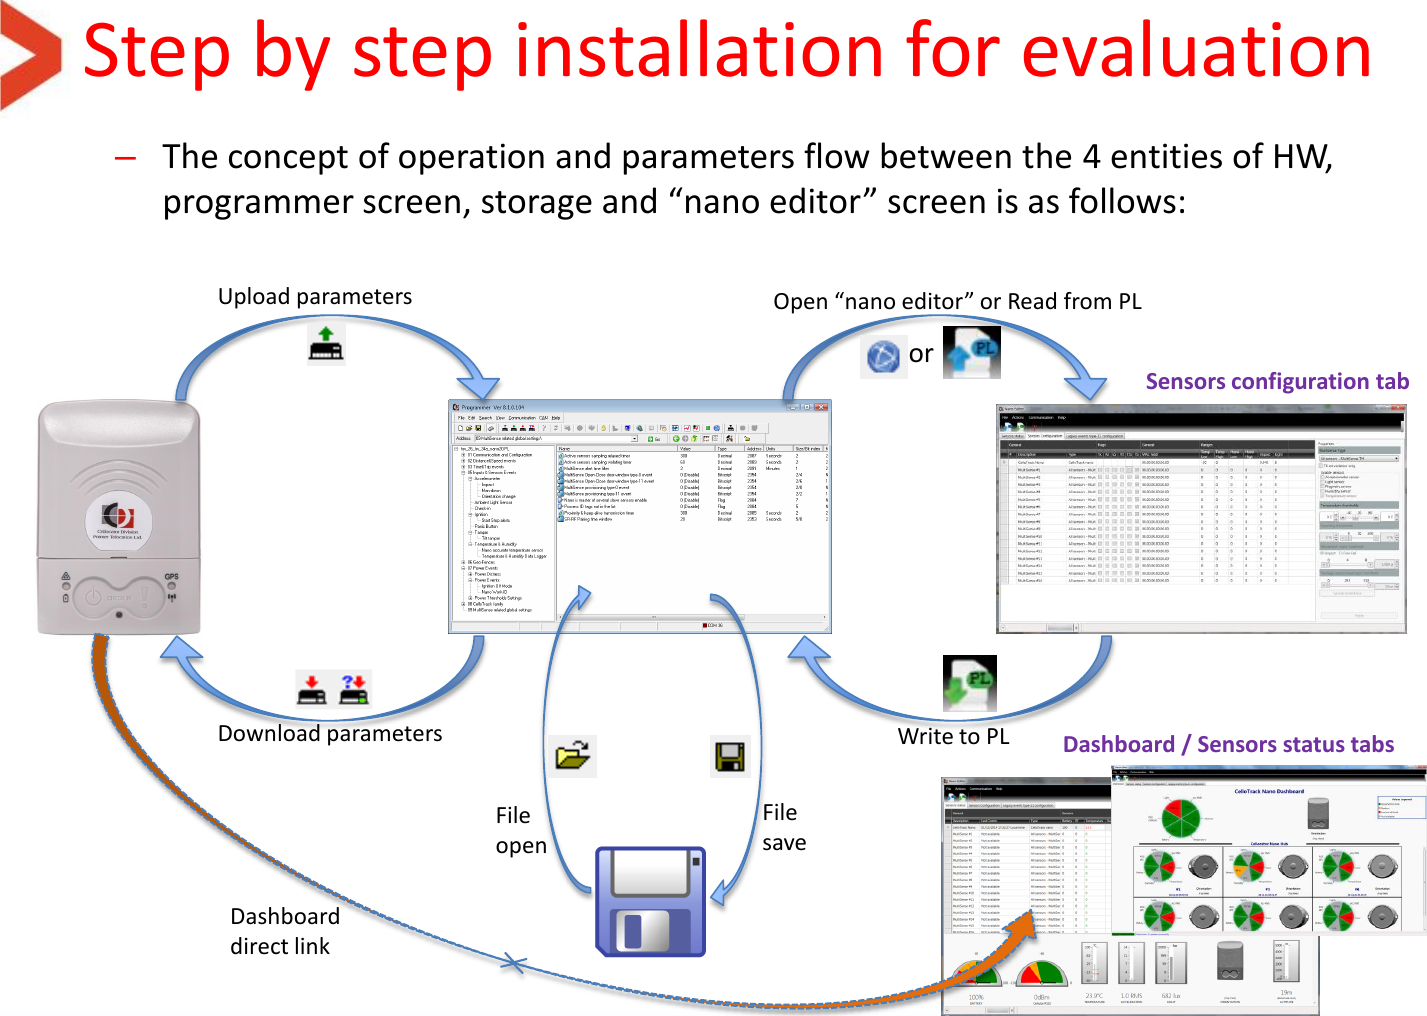 Step by step installation for evaluation –The concept of operation and parameters flow between the 4 entities of HW, programmer screen, storage and “nano editor” screen is as follows: File save File open or Open “nano editor” or Read from PL Write to PL Upload parameters Download parameters Dashboard direct link Dashboard / Sensors status tabs Sensors configuration tab 